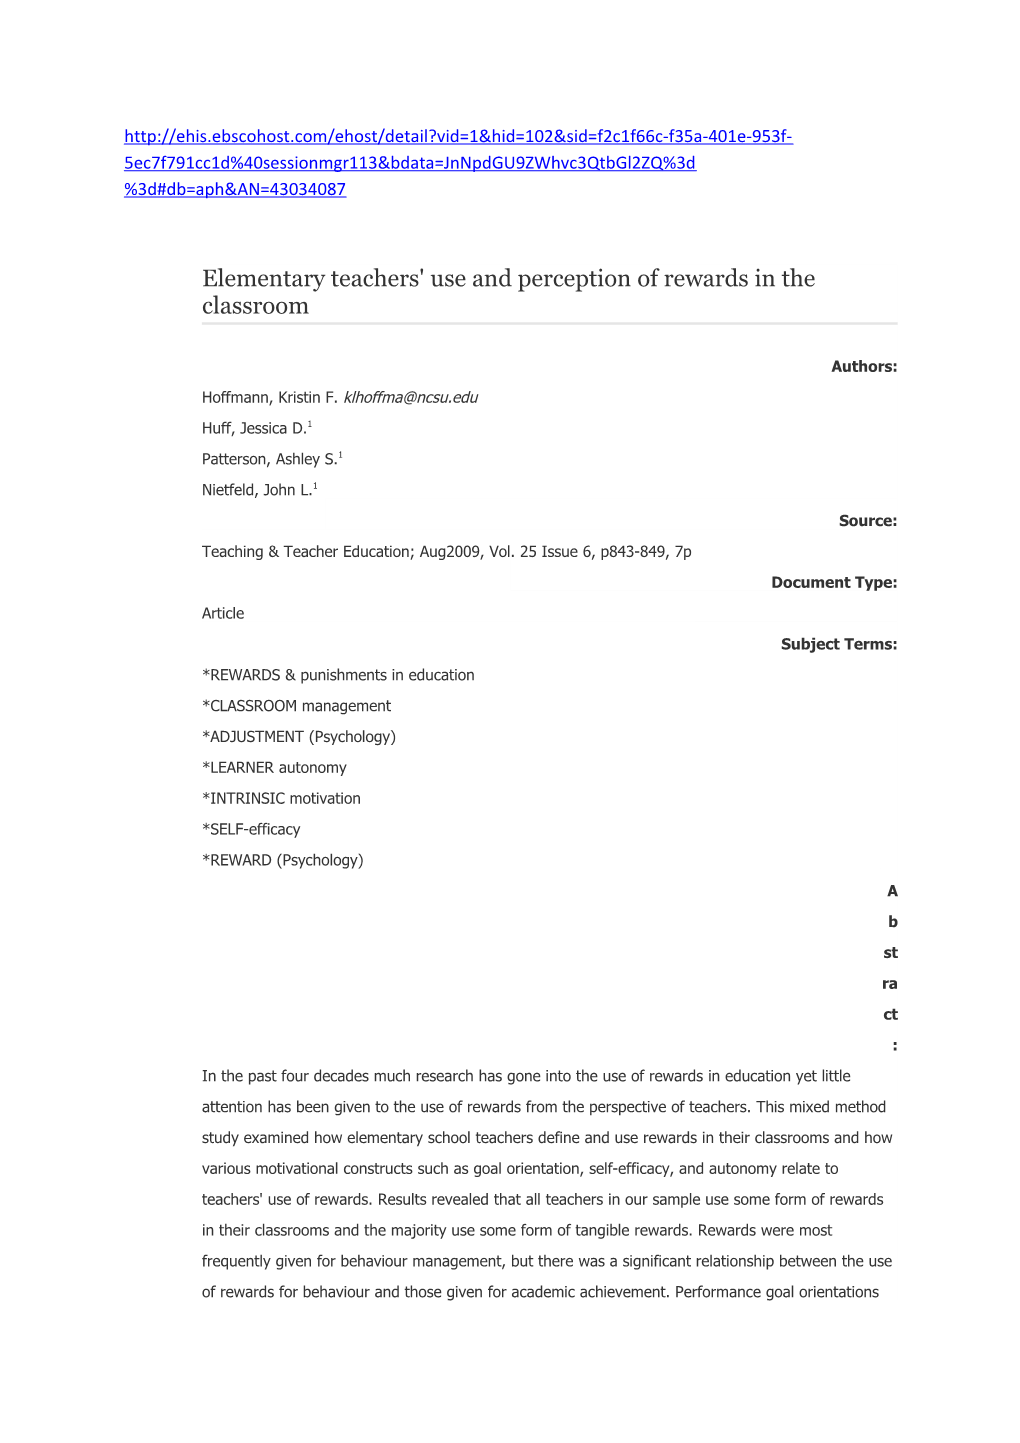 Elementary Teachers' Use and Perception of Rewards in the Classroom